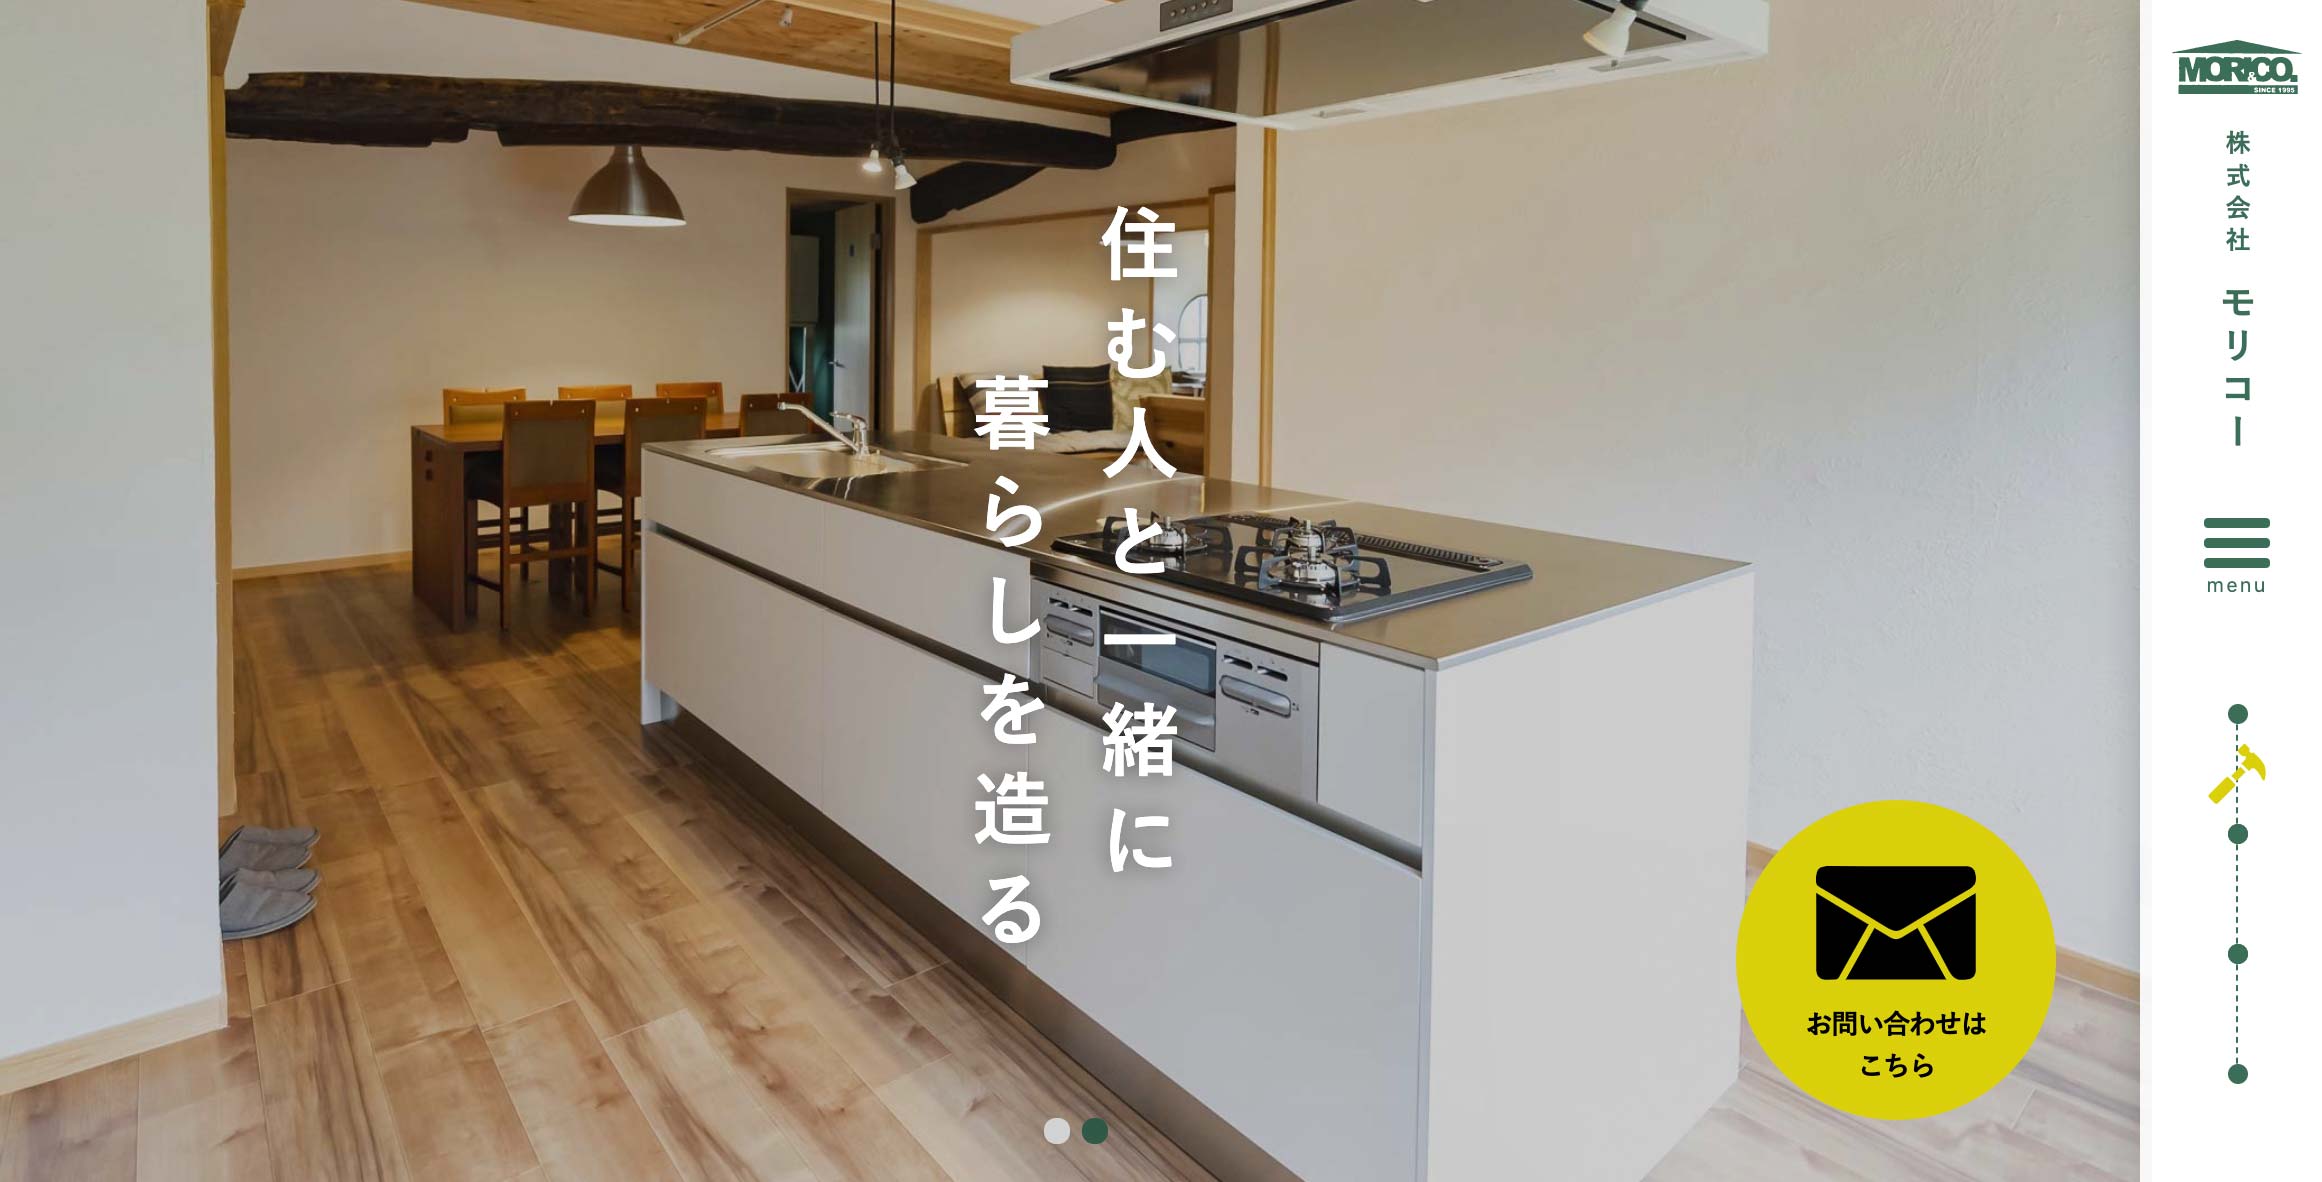 Mori and Co's homepage, with a renovated room and kitchen as the main image. A contact button hovers over the slider and a sidebar menu sticks to the right hand side of the page